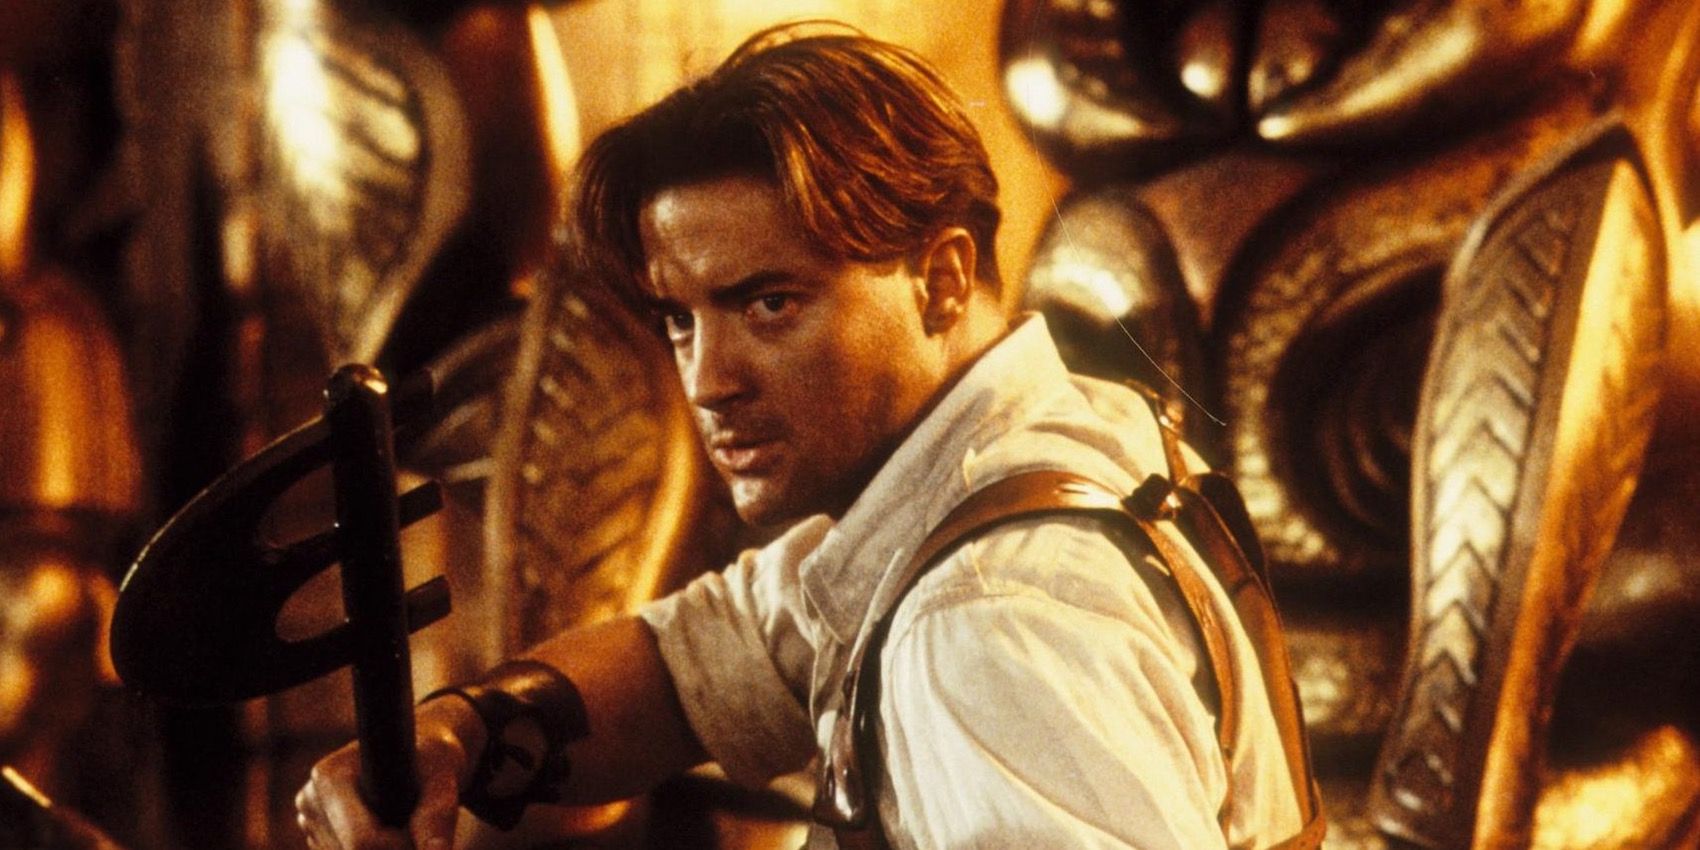 The Best Mummy Reboot Would Pit Brendan Fraser Against Other Universal Monsters